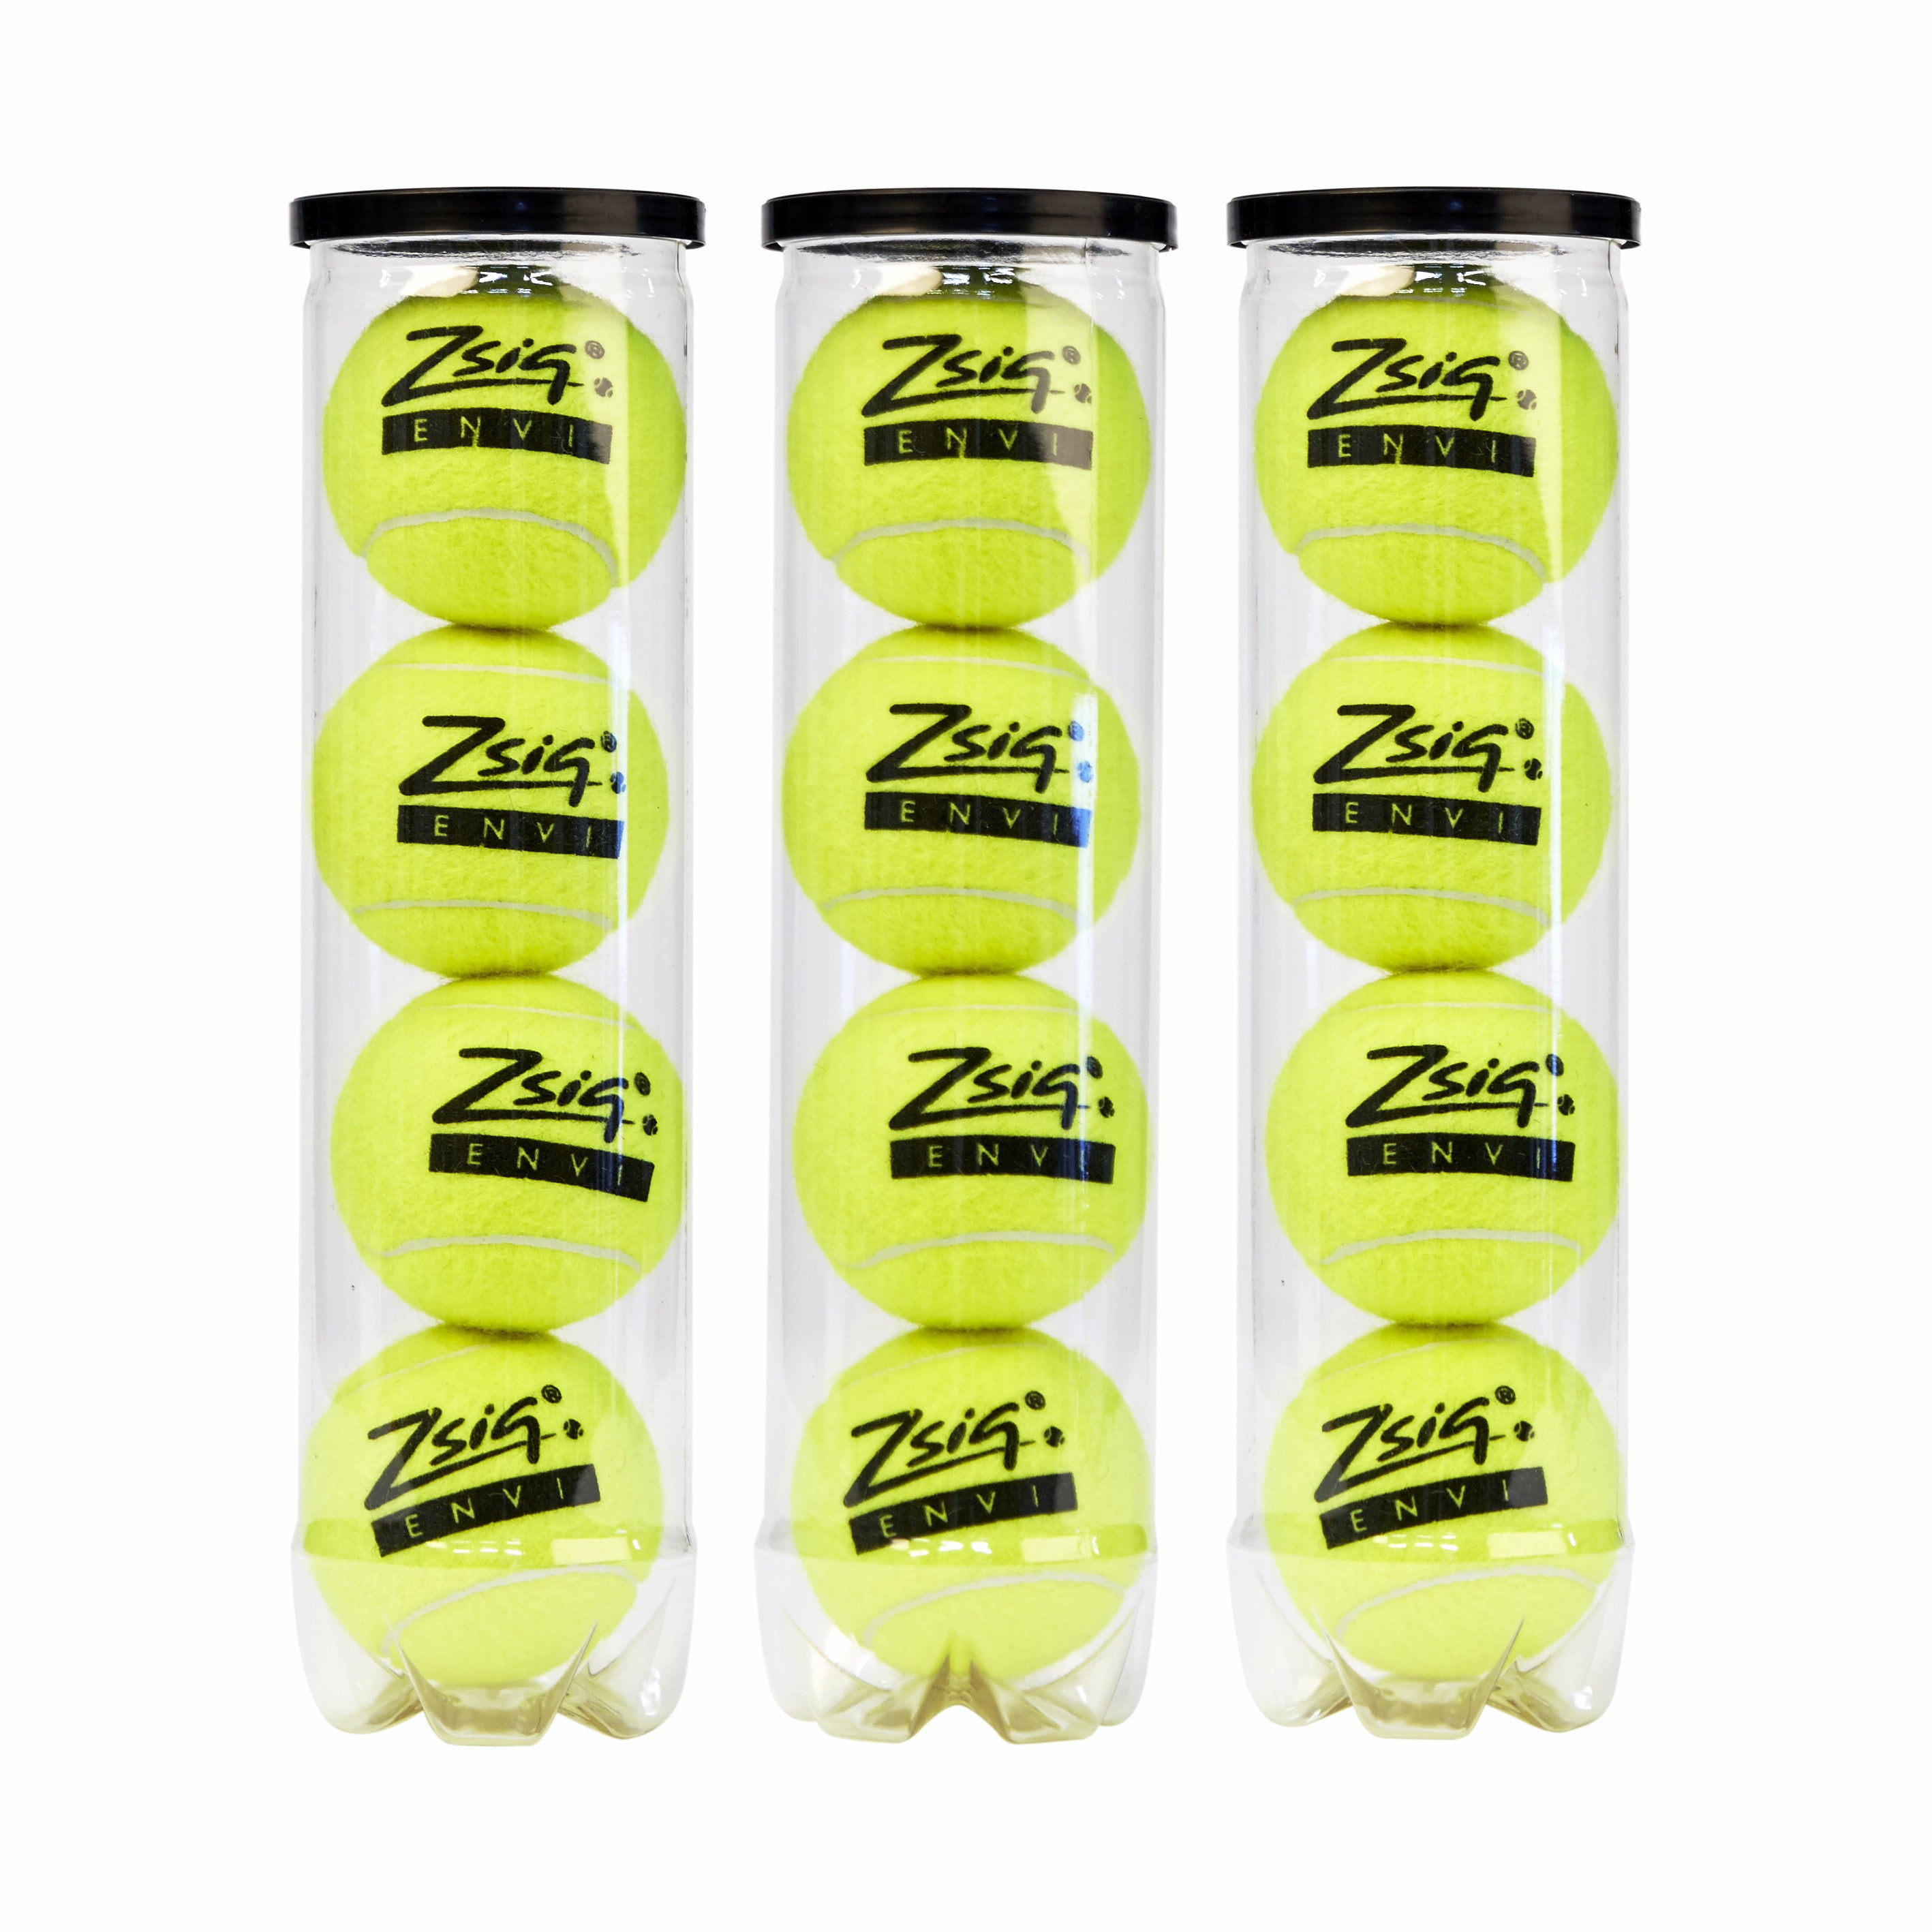 New top quality pressurised tournament ball from Zsig - in tubes of 4 balls.